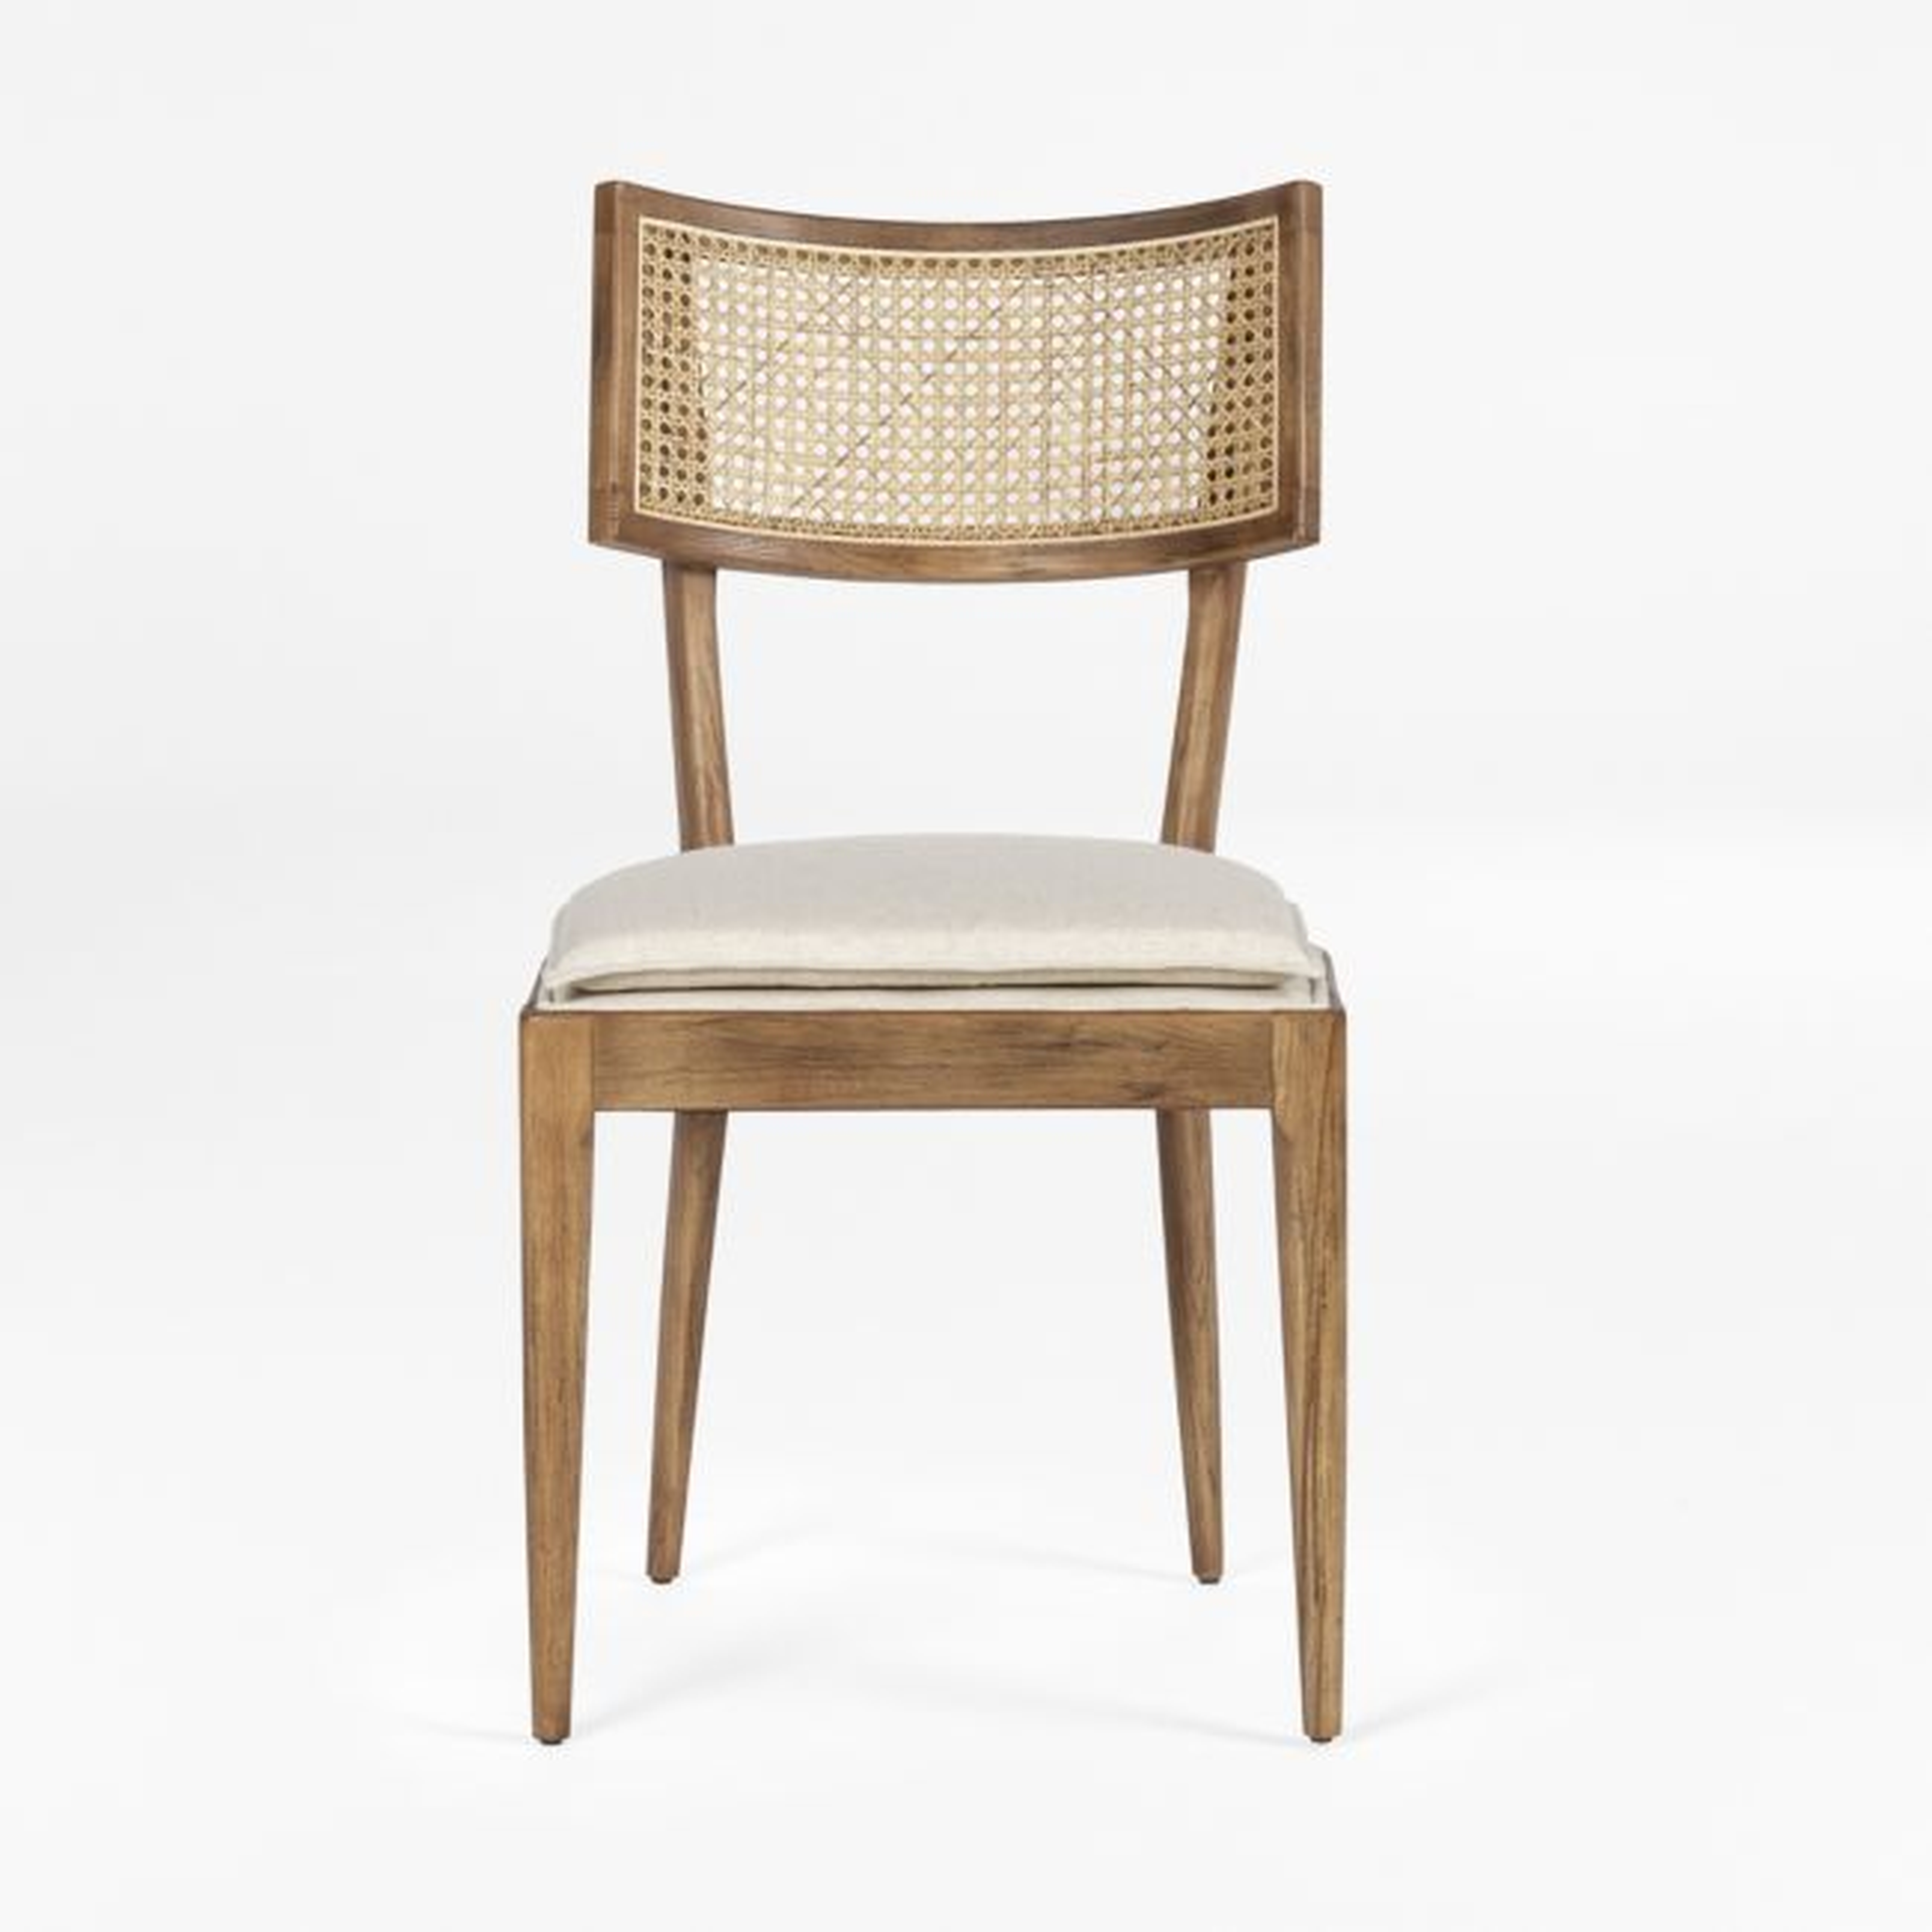 Libby Cane Dining Chair, Natural - Crate and Barrel